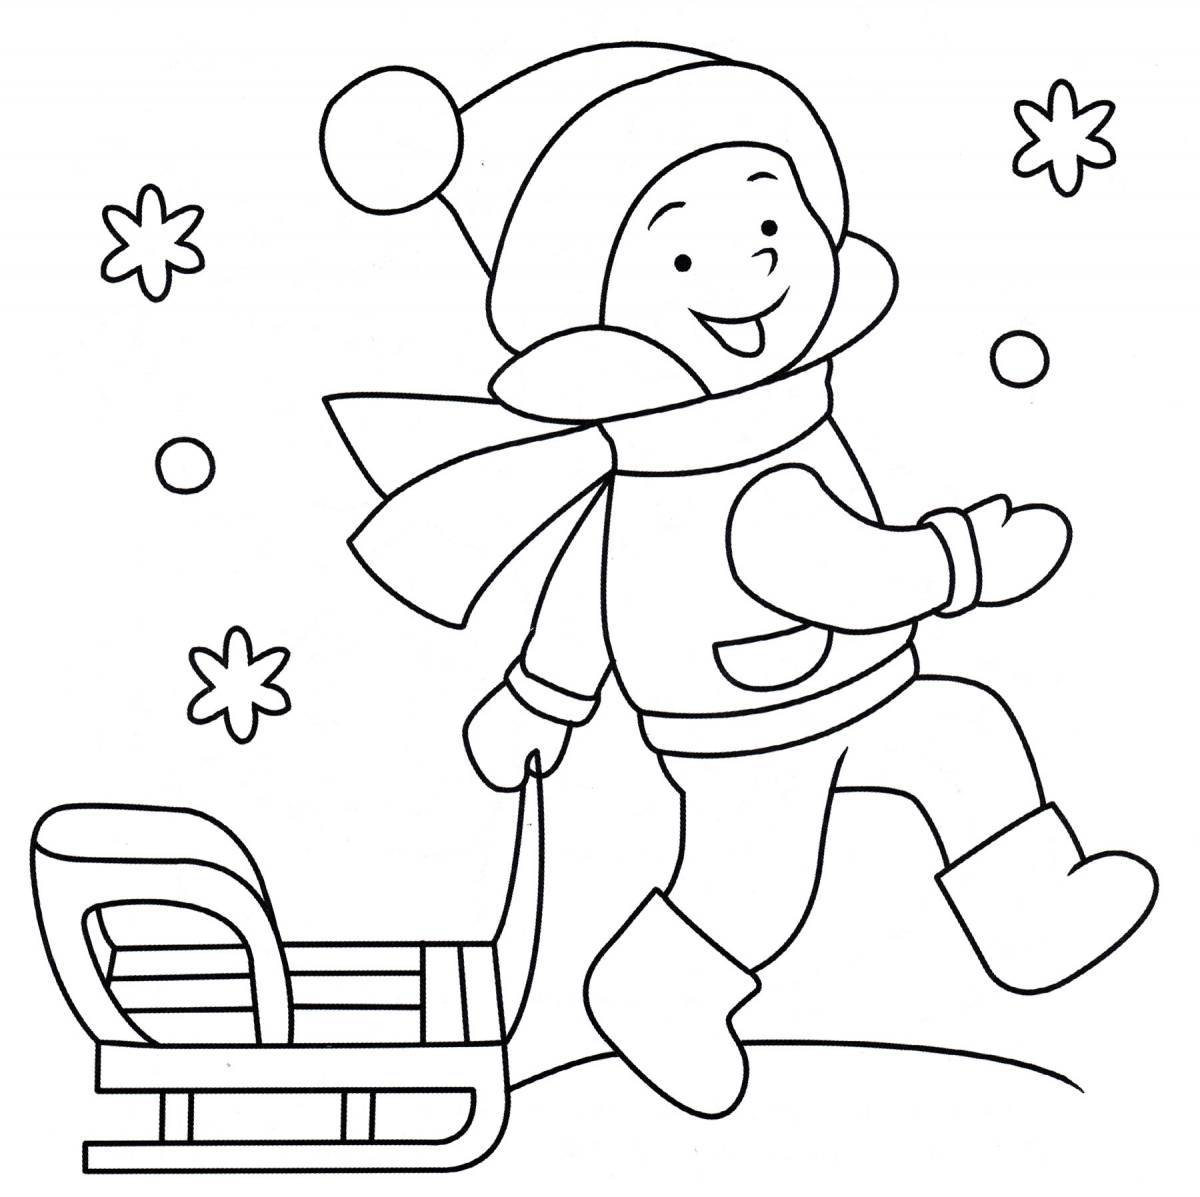 Joyful winter coloring book for children 3-4 years old